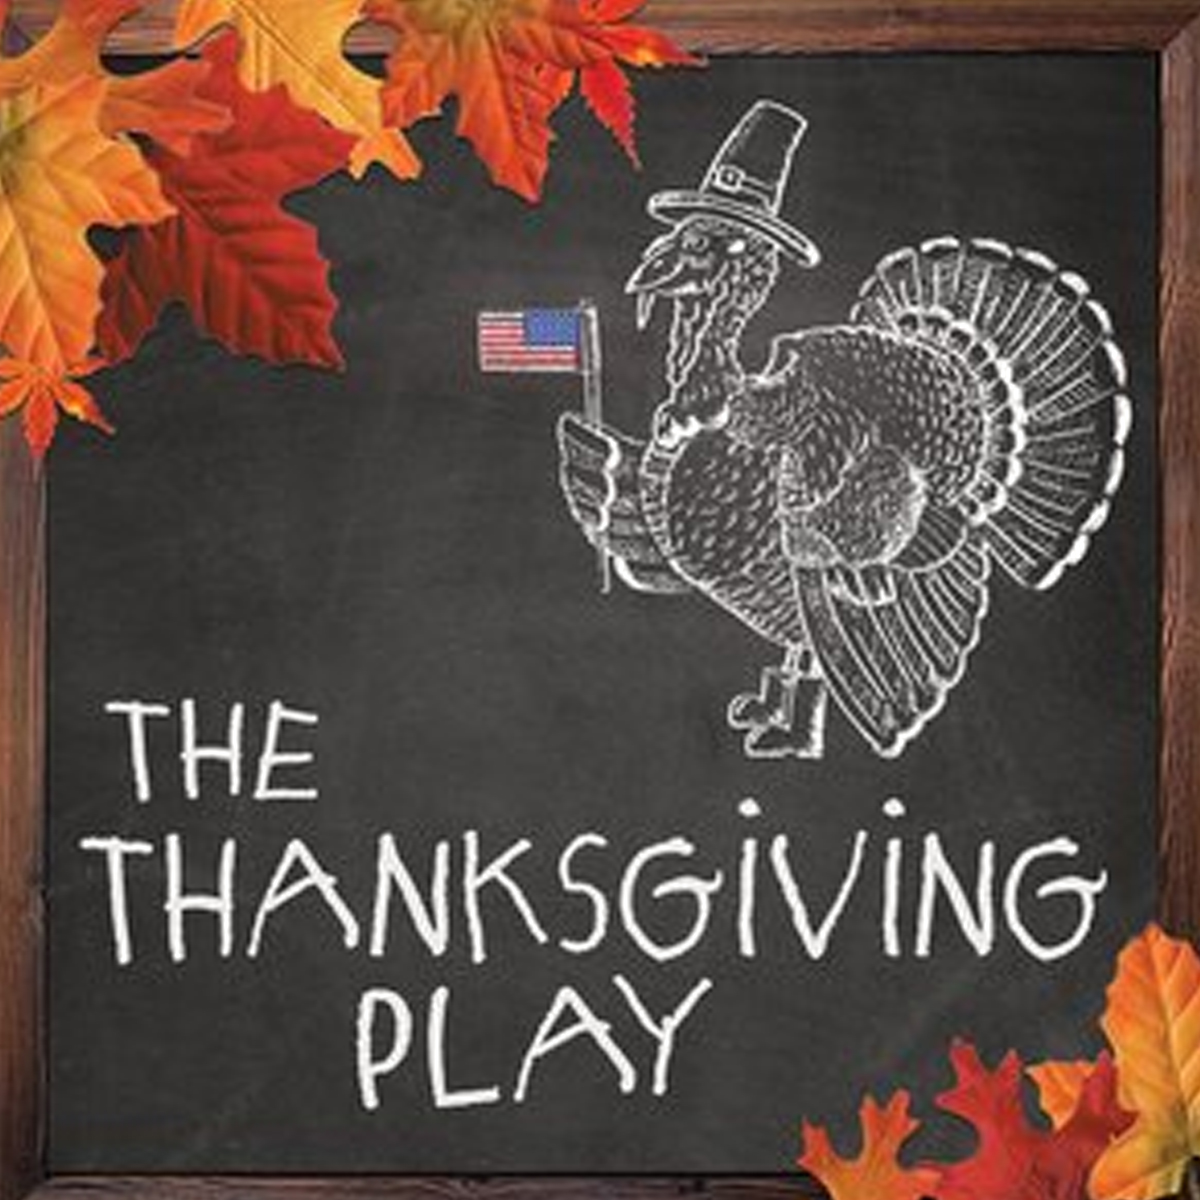 The Thanksgiving Play at the Red Barn Theater